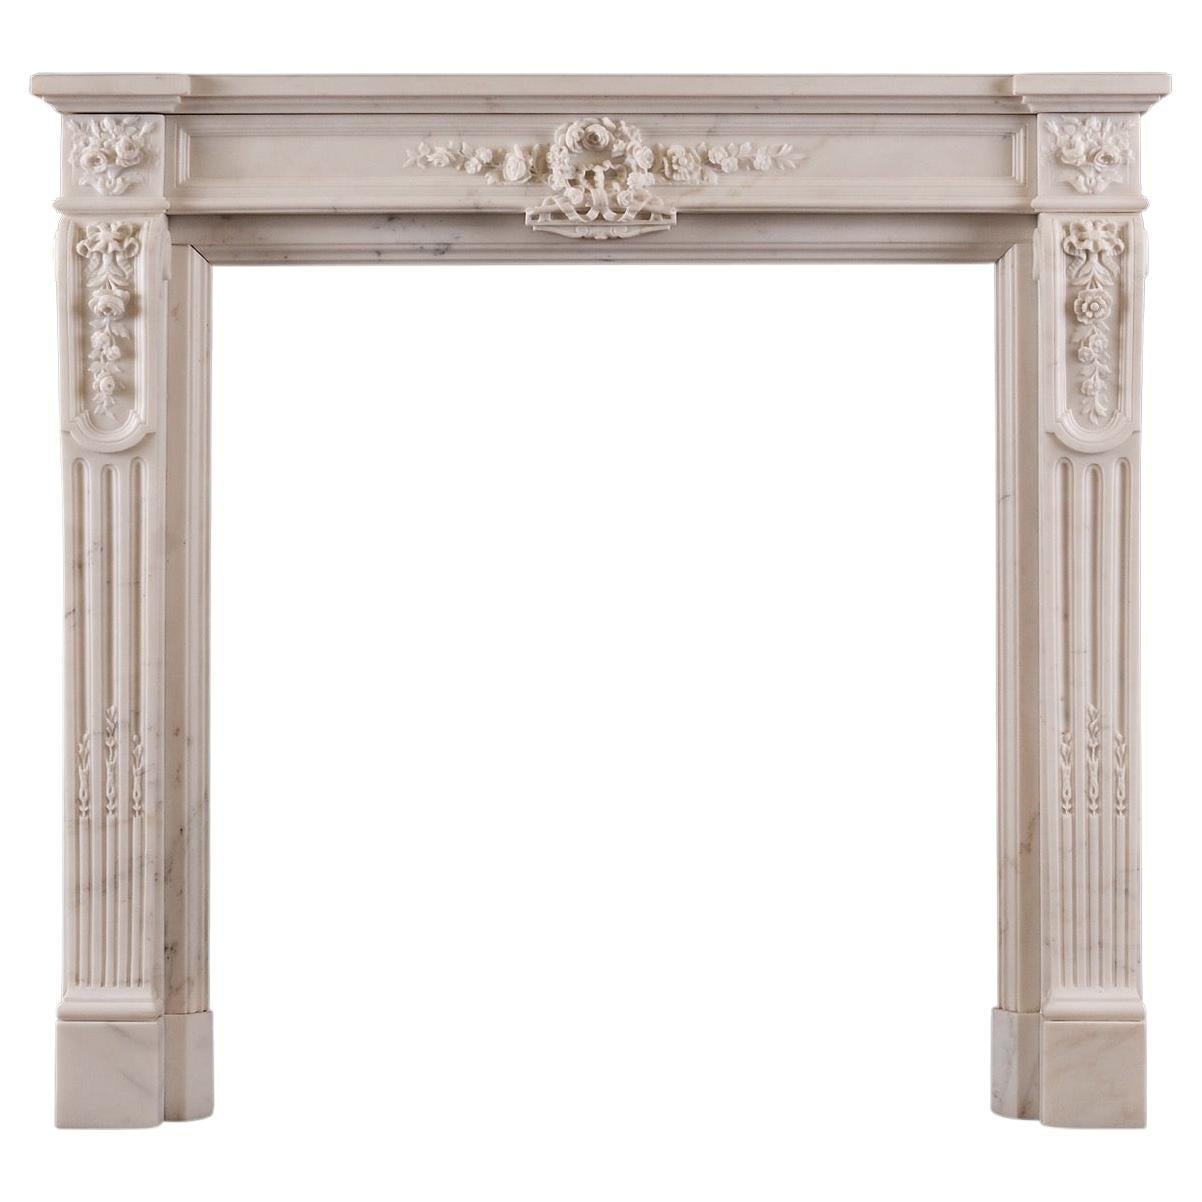 A Statuary White Marble Fireplace in the Louis XVI Style